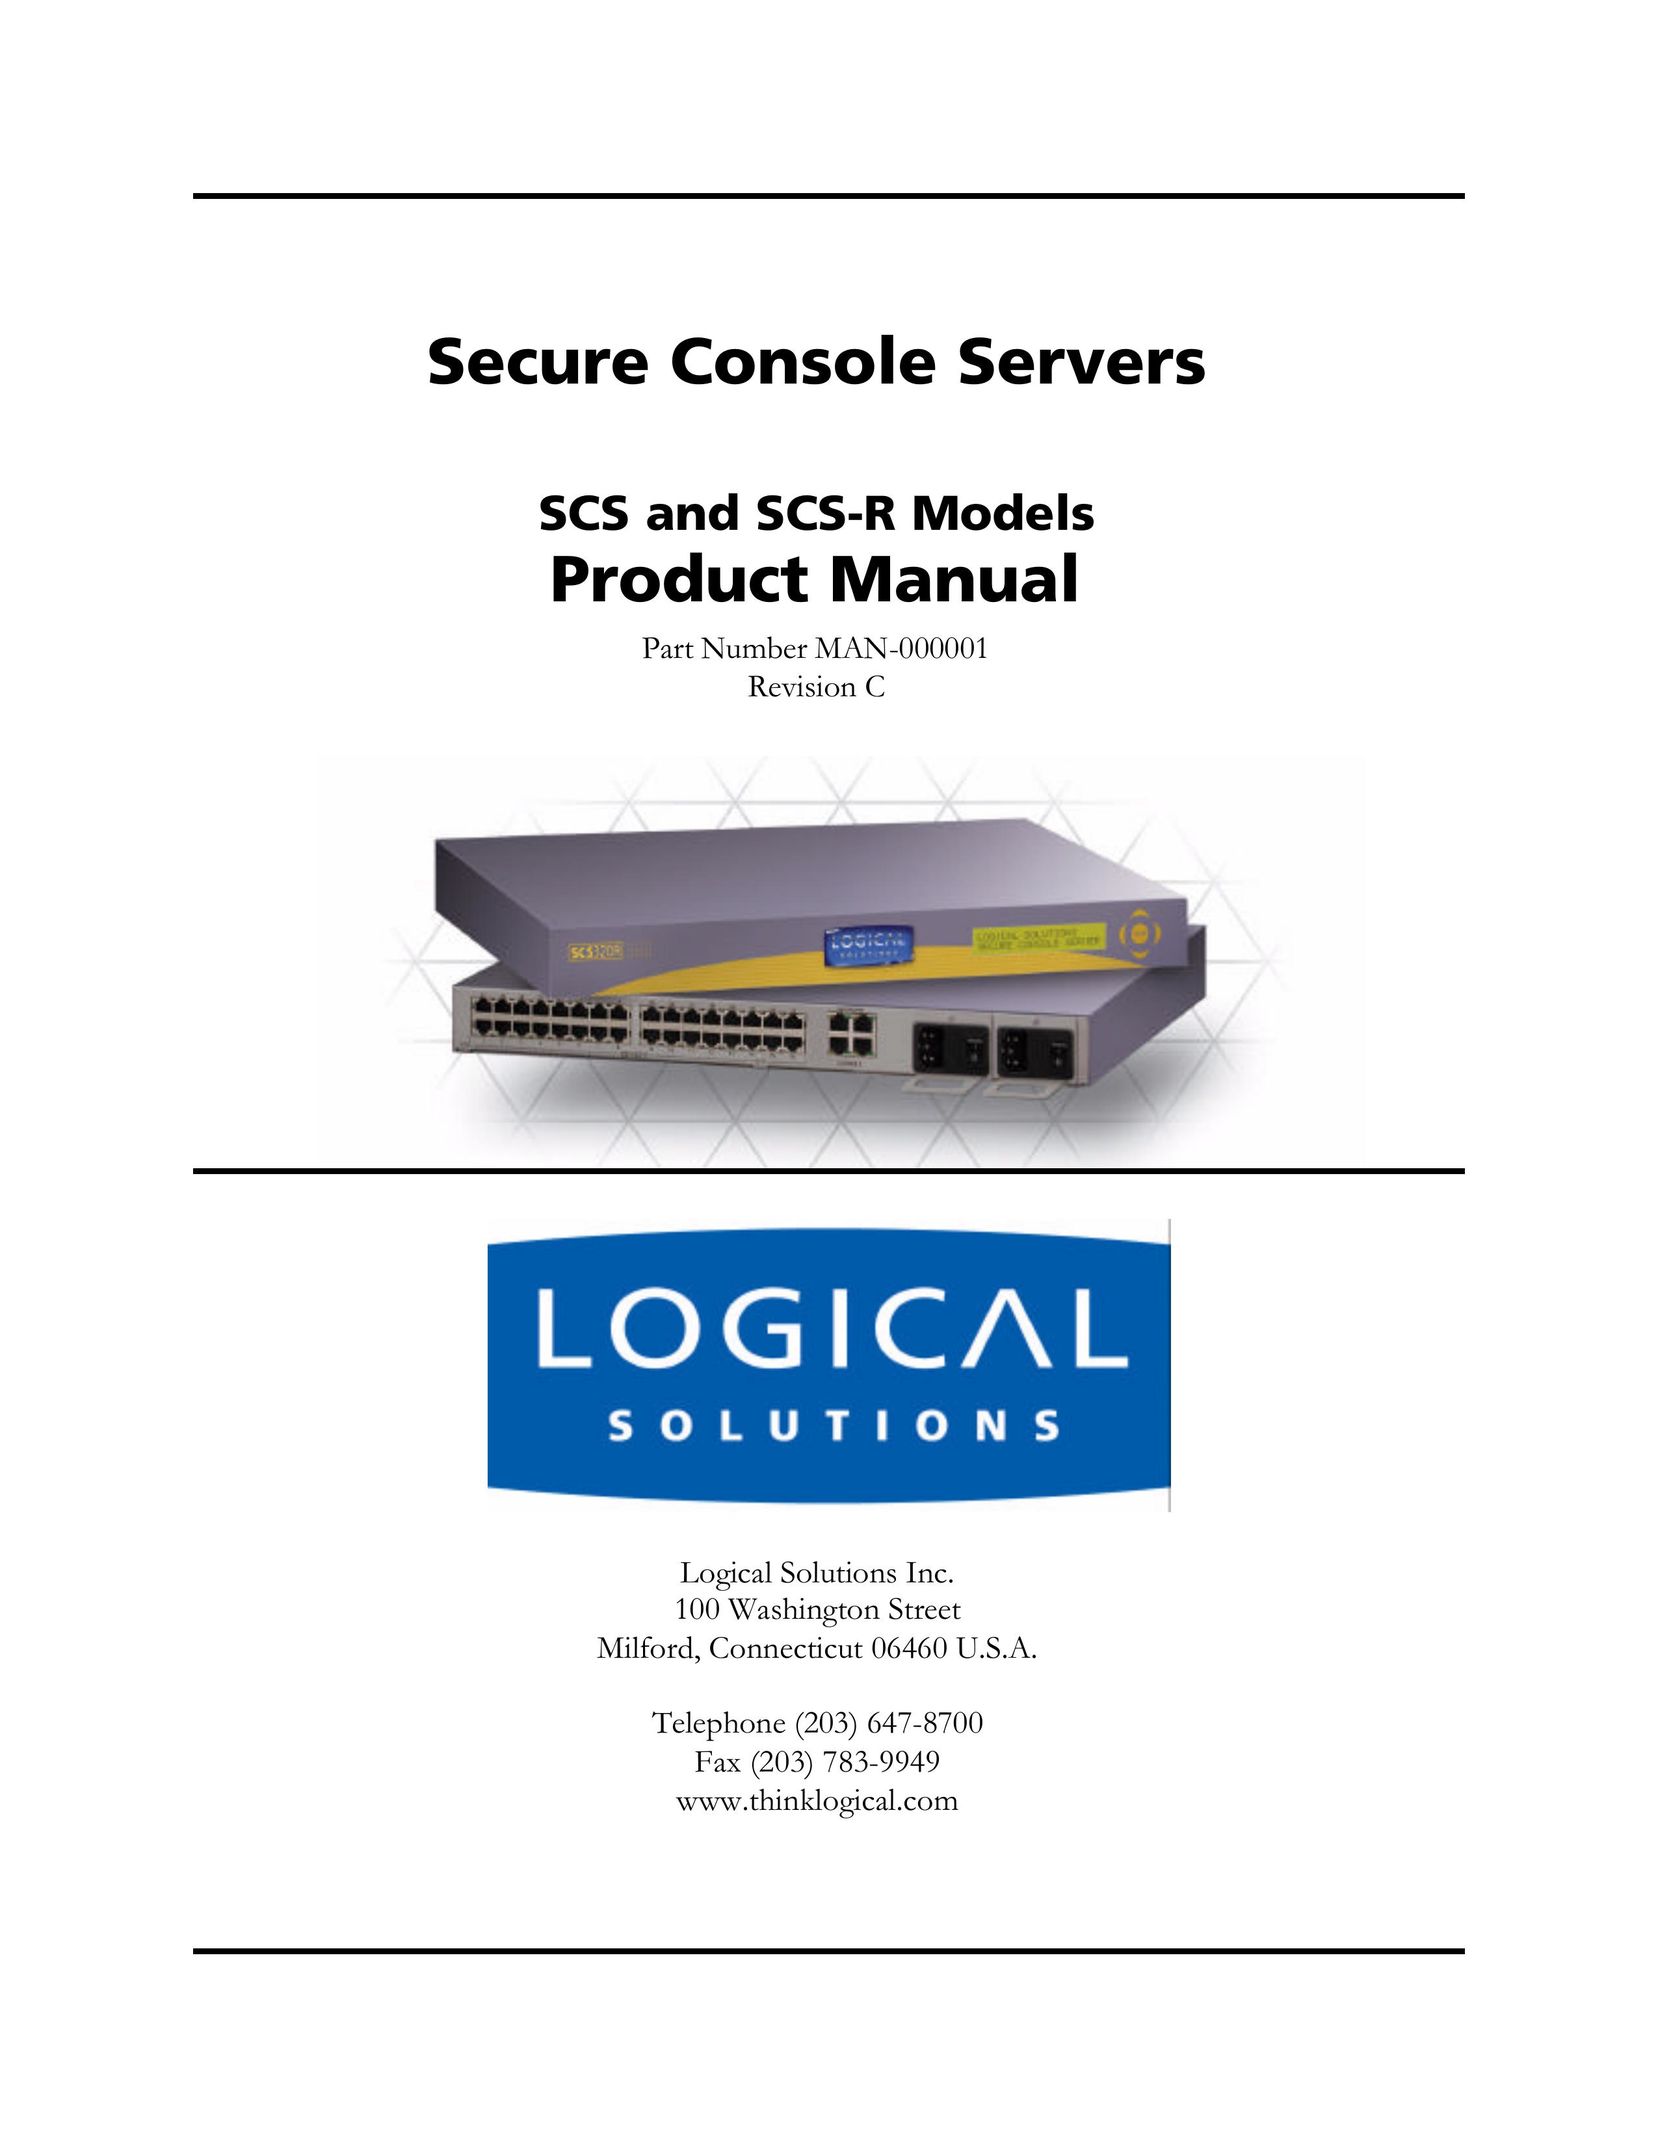 Logical Solutions SCS-R Video Gaming Accessories User Manual